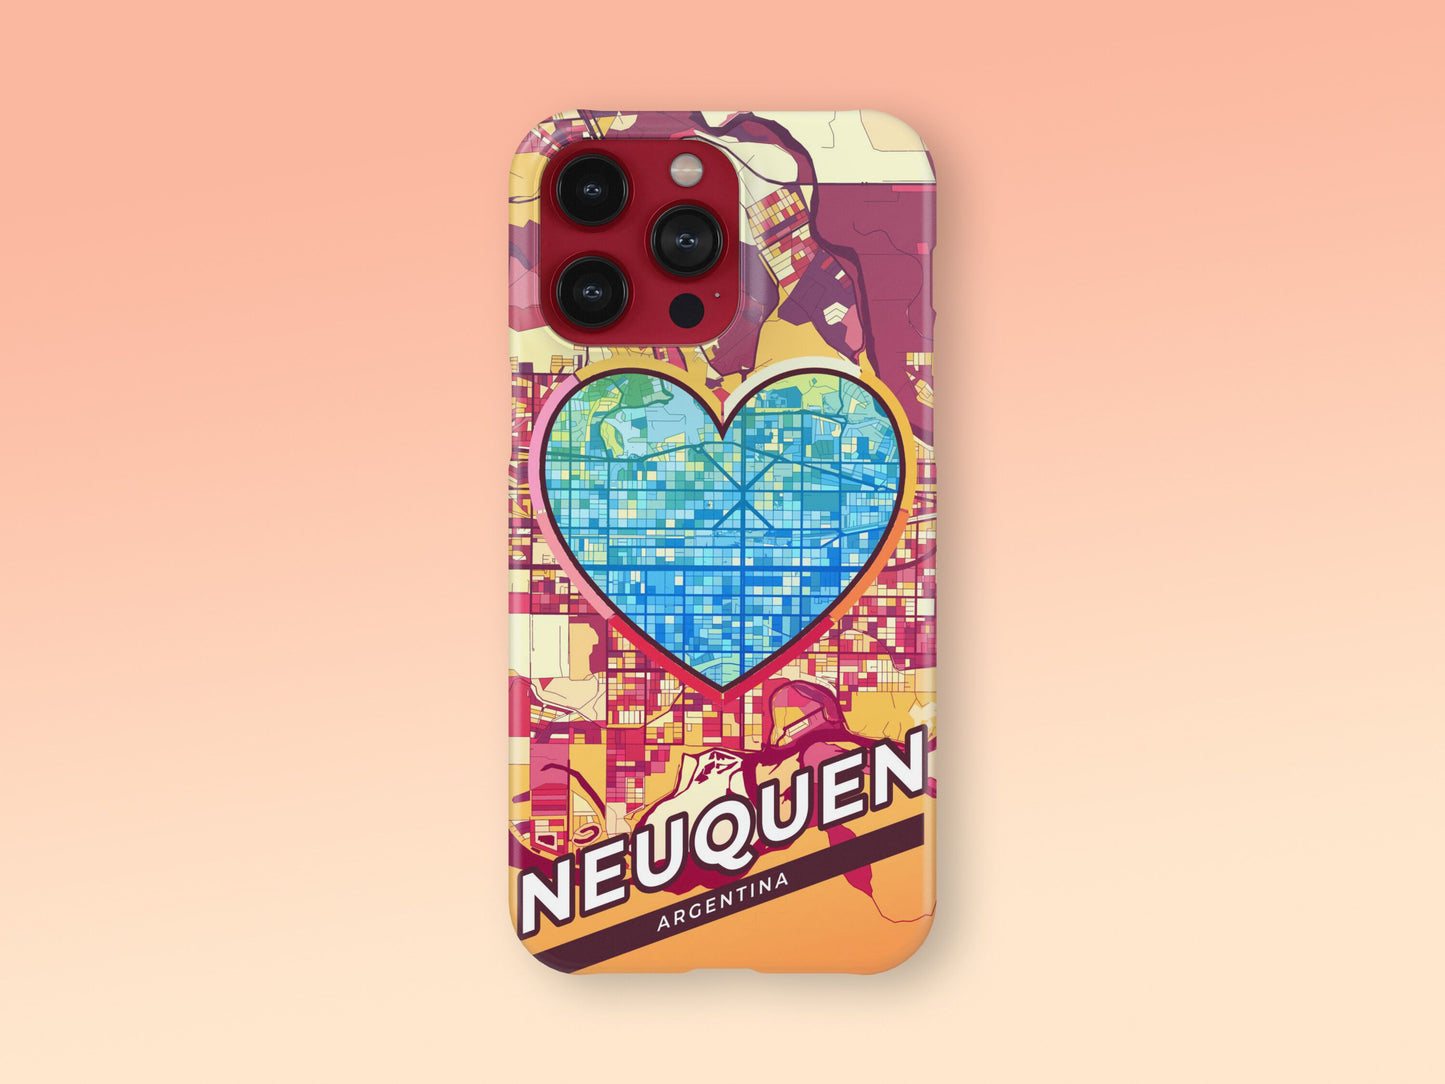 Neuquen Argentina slim phone case with colorful icon 2